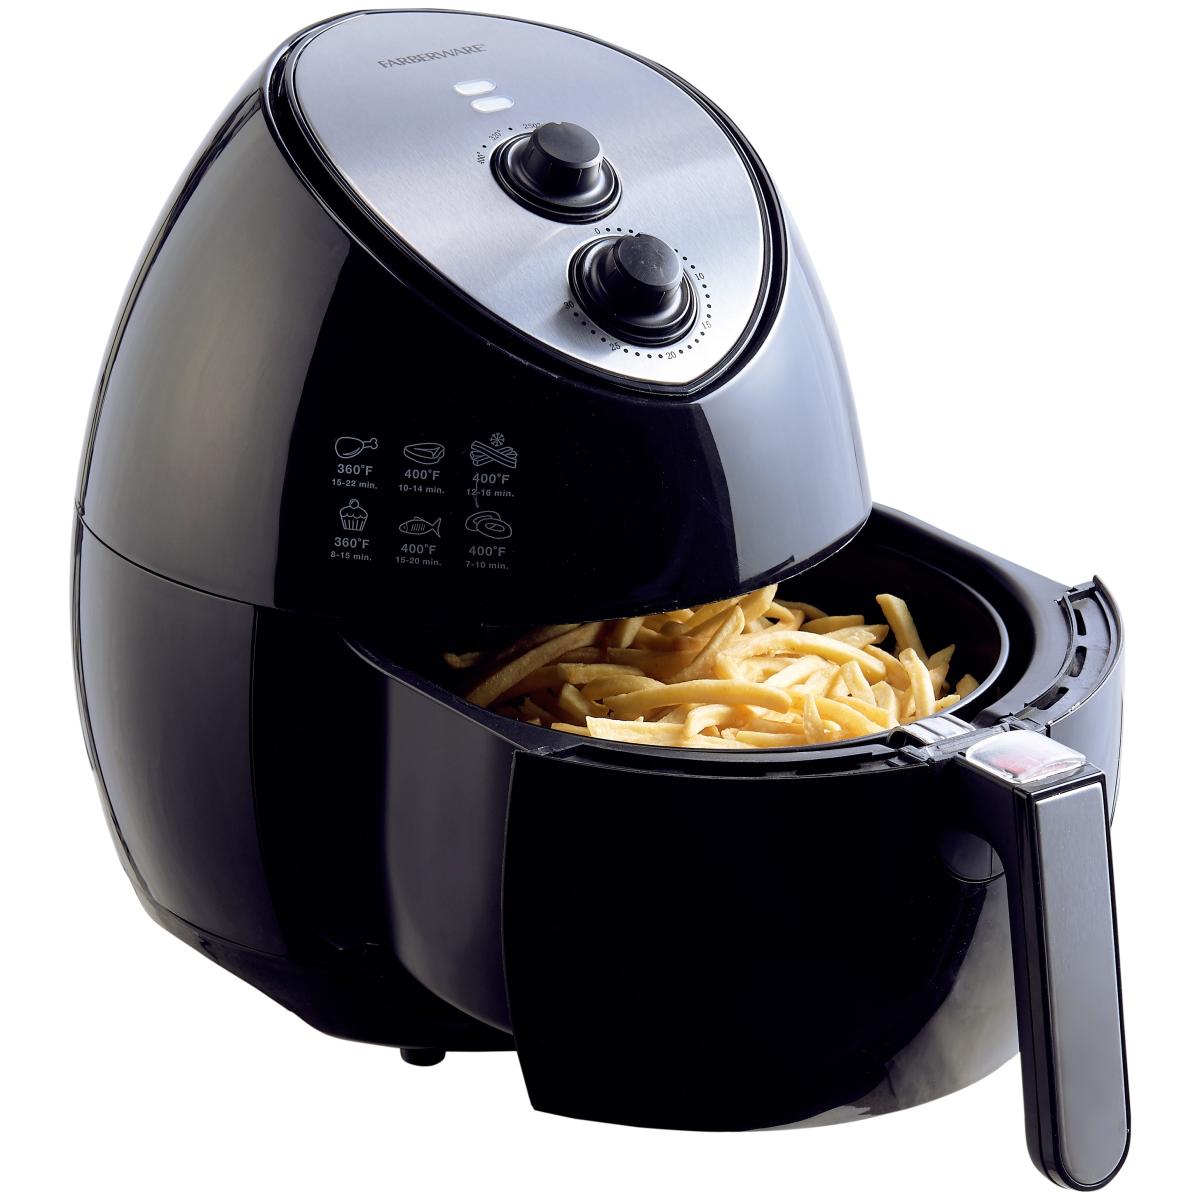 Walmart's Black Friday sale has air fryers for as low as $38